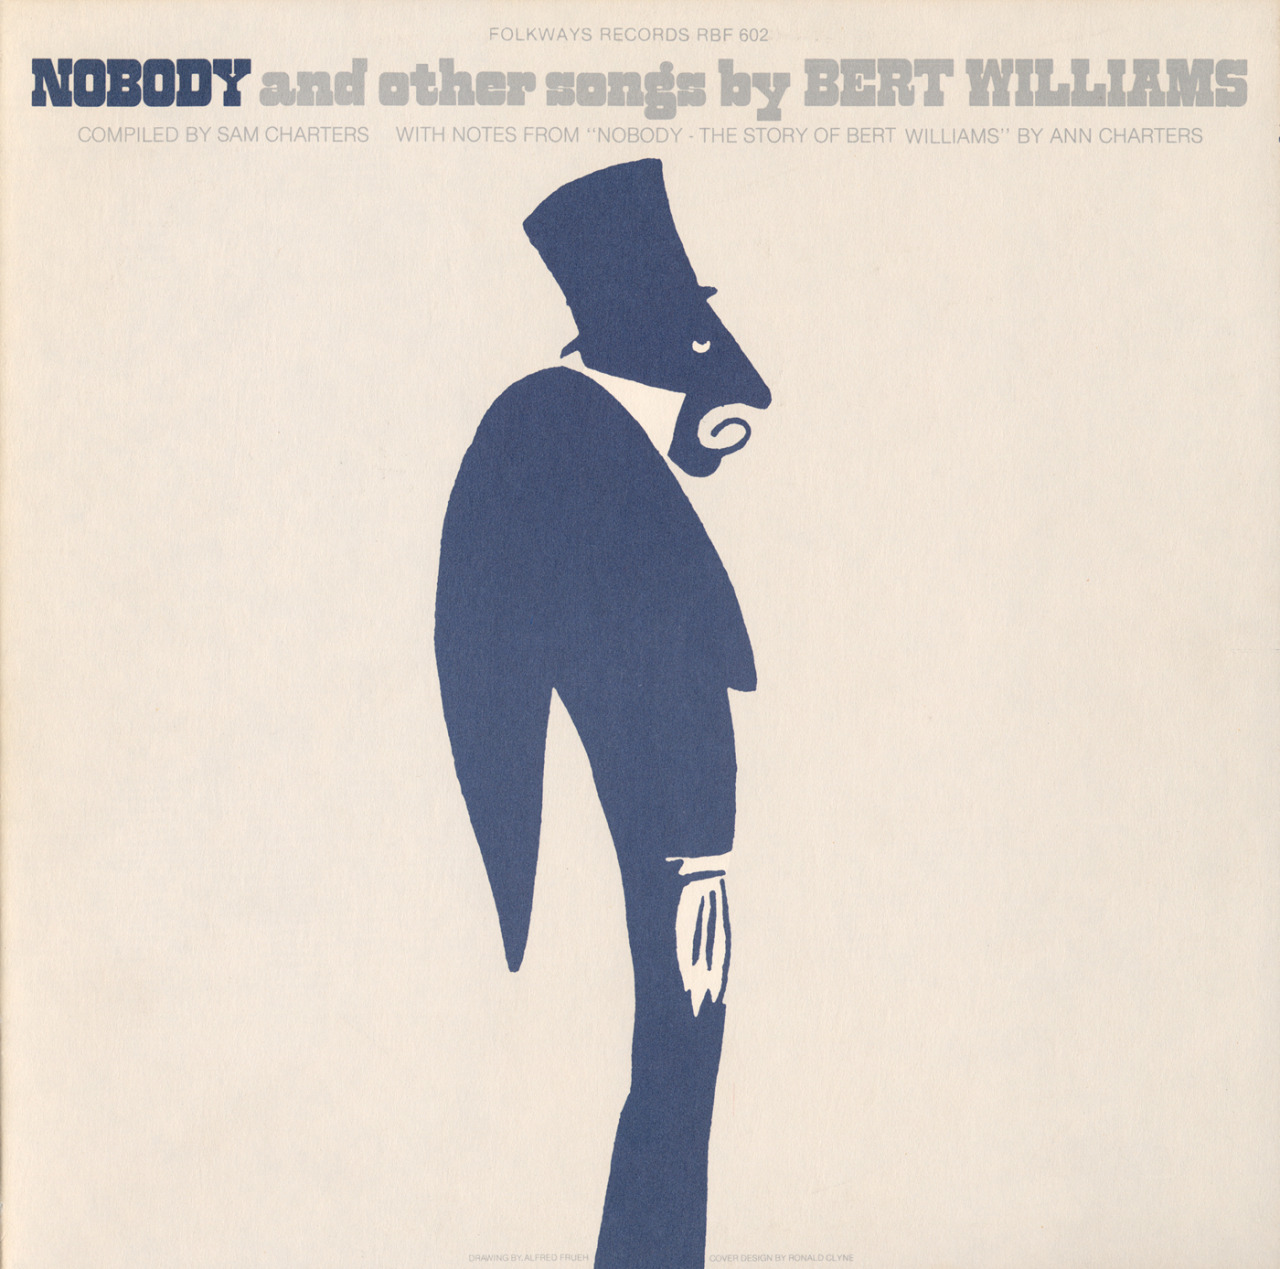 #AlbumCoverTuesday Alfred Frugh provided the minimalist artwork featured on the cover of Bert Williams’ 1981 Folkways release Nobody and Other Songs.